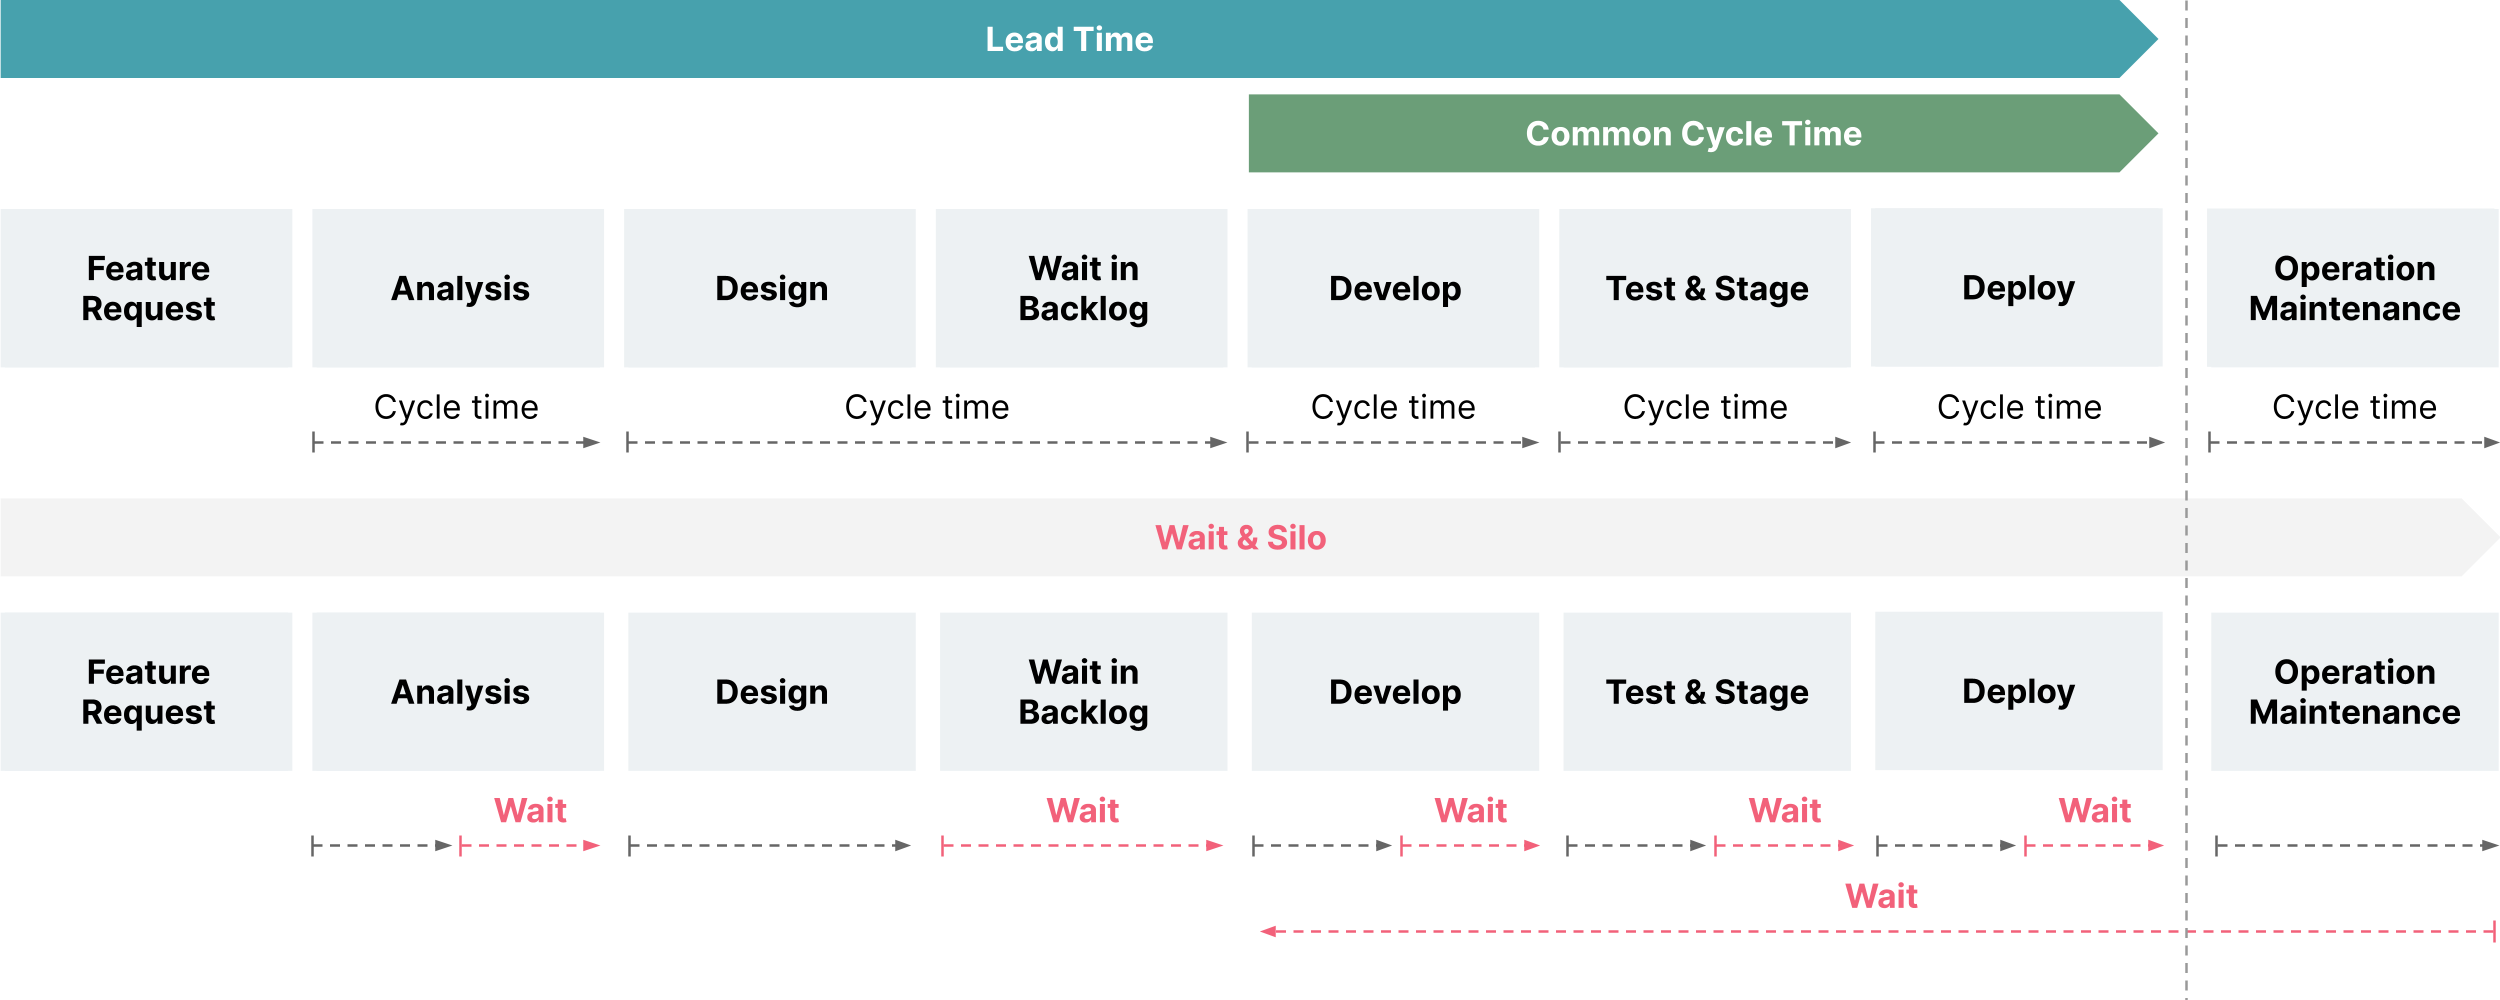 Project lead times broken down into various stages